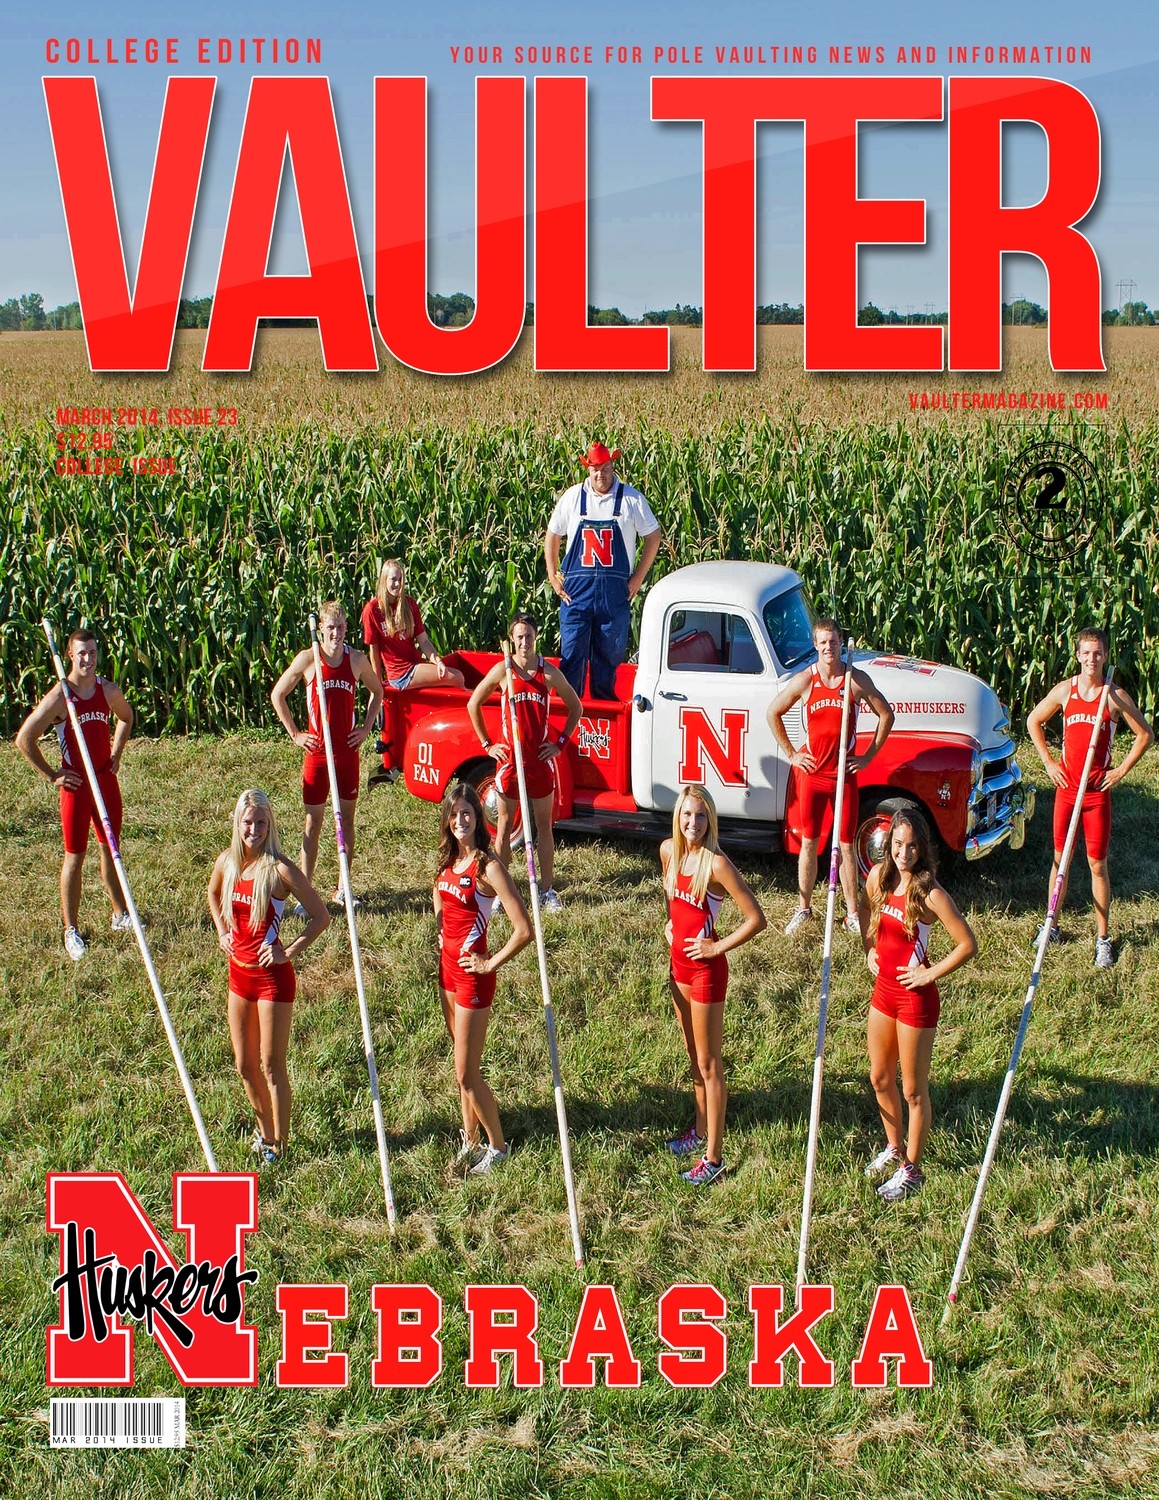 Buy a March 2014 Nebraska Magazine - Get Poster for $20 - That's $5 Off